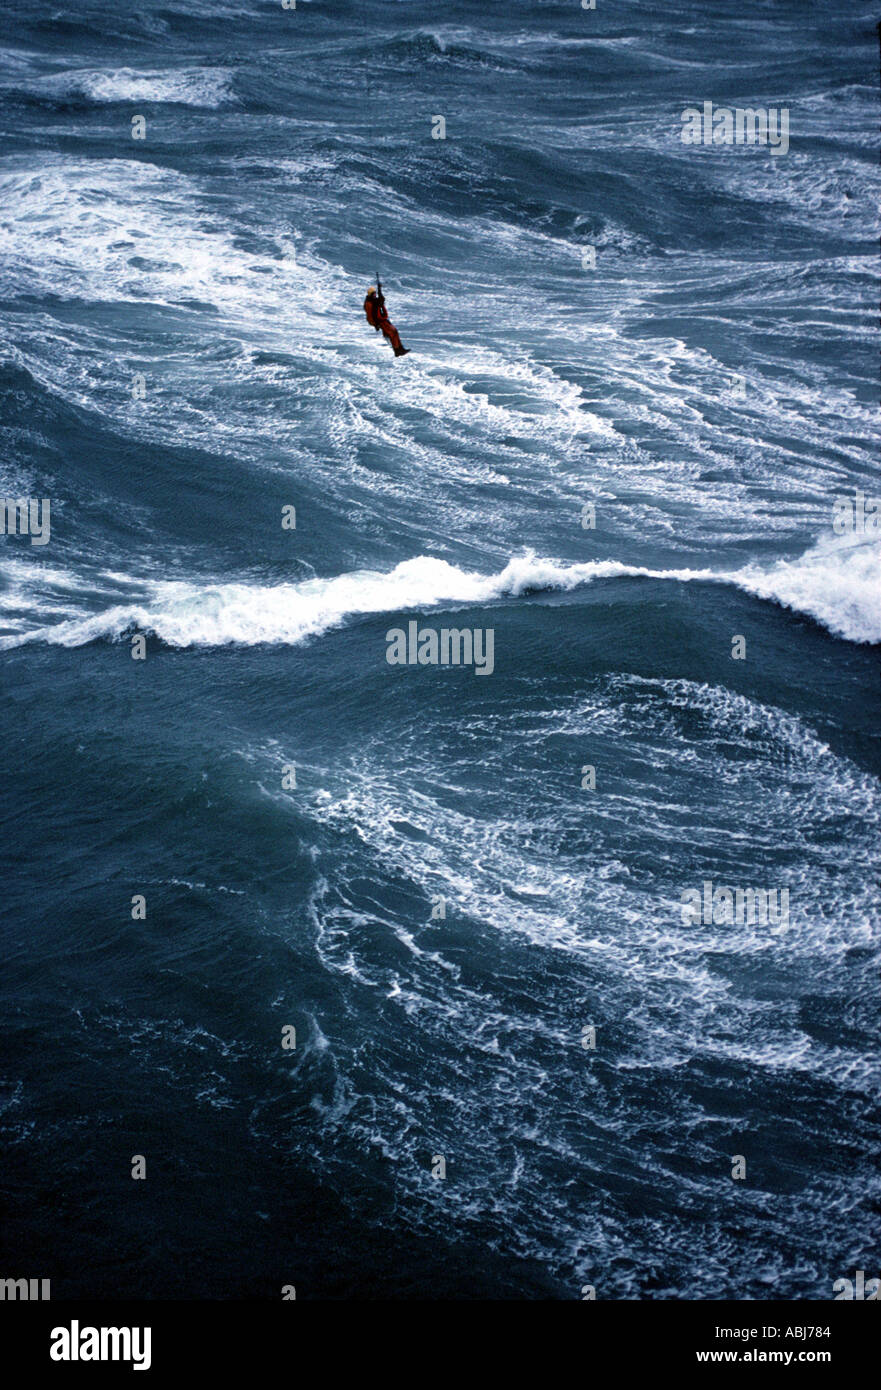 Helicopter winch man above rough sea and waves Stock Photo